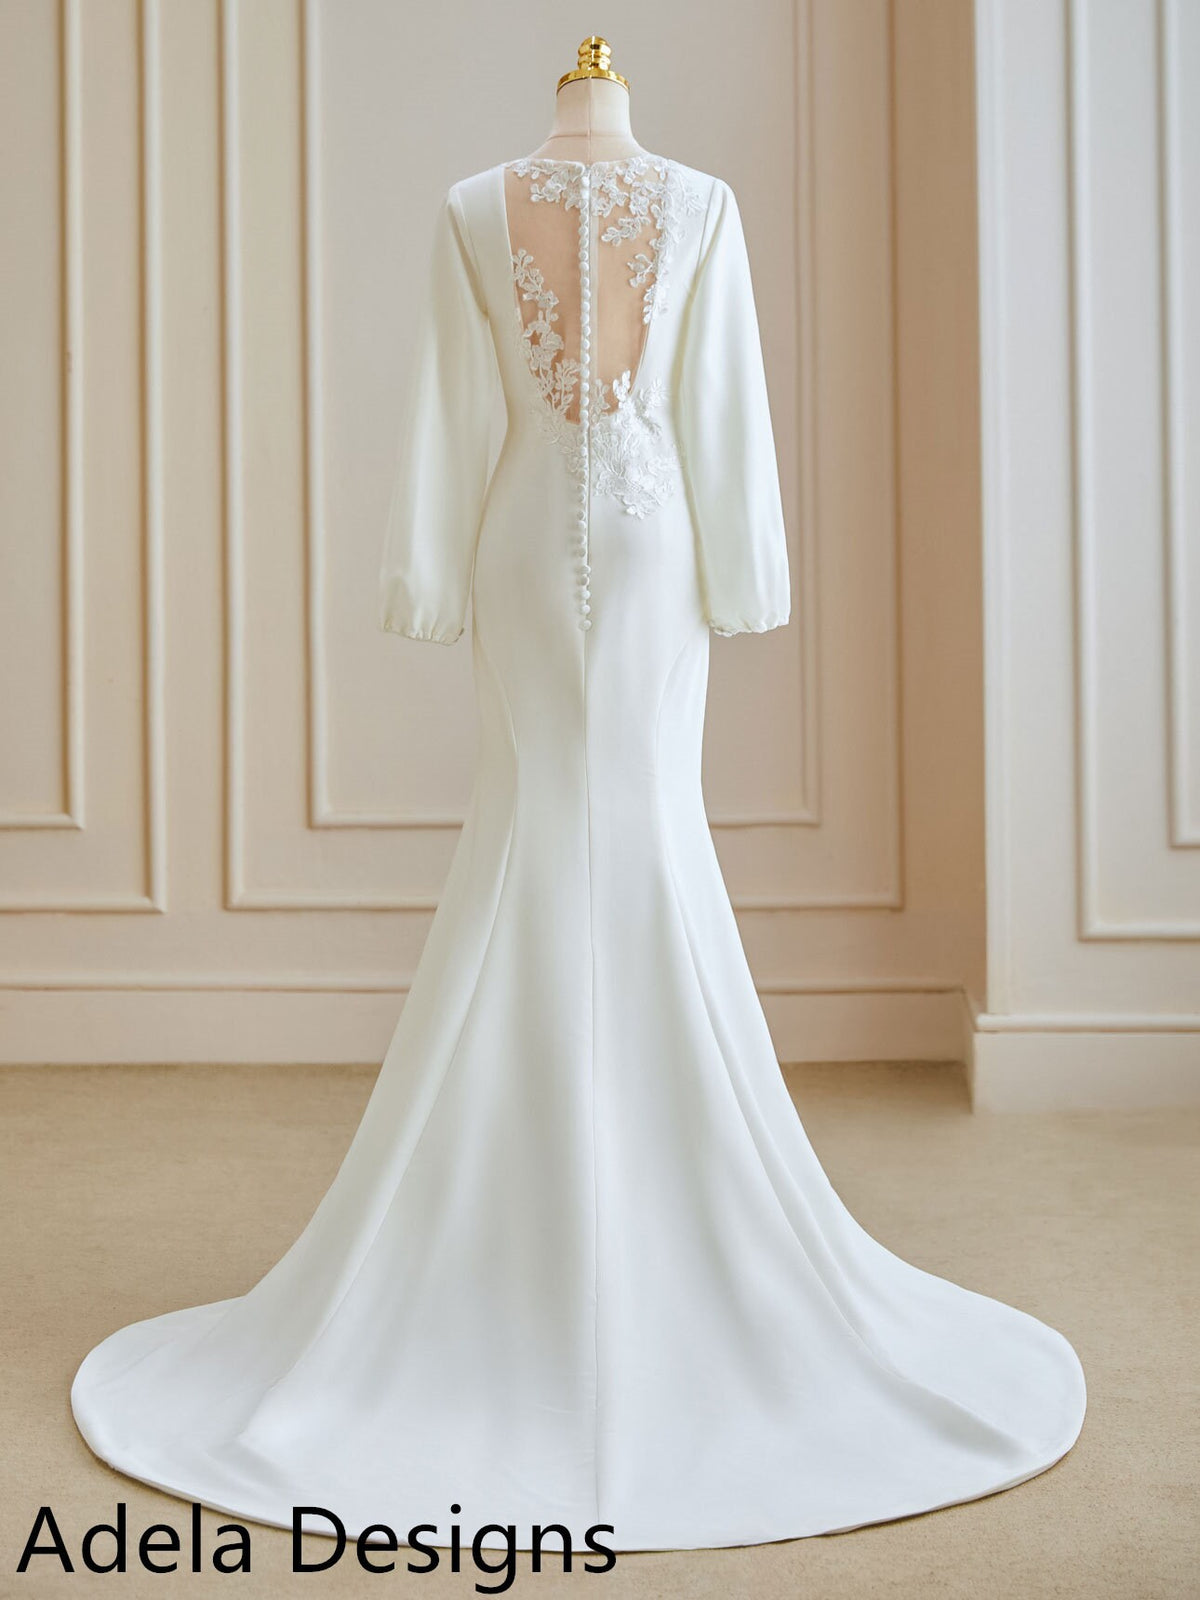 Crepe Fit And Flare Long Bishop Sleeves Simple Bridal Gown Wedding Dress Lace Back Buttons Plus Size Sexy Neckline Minimalist